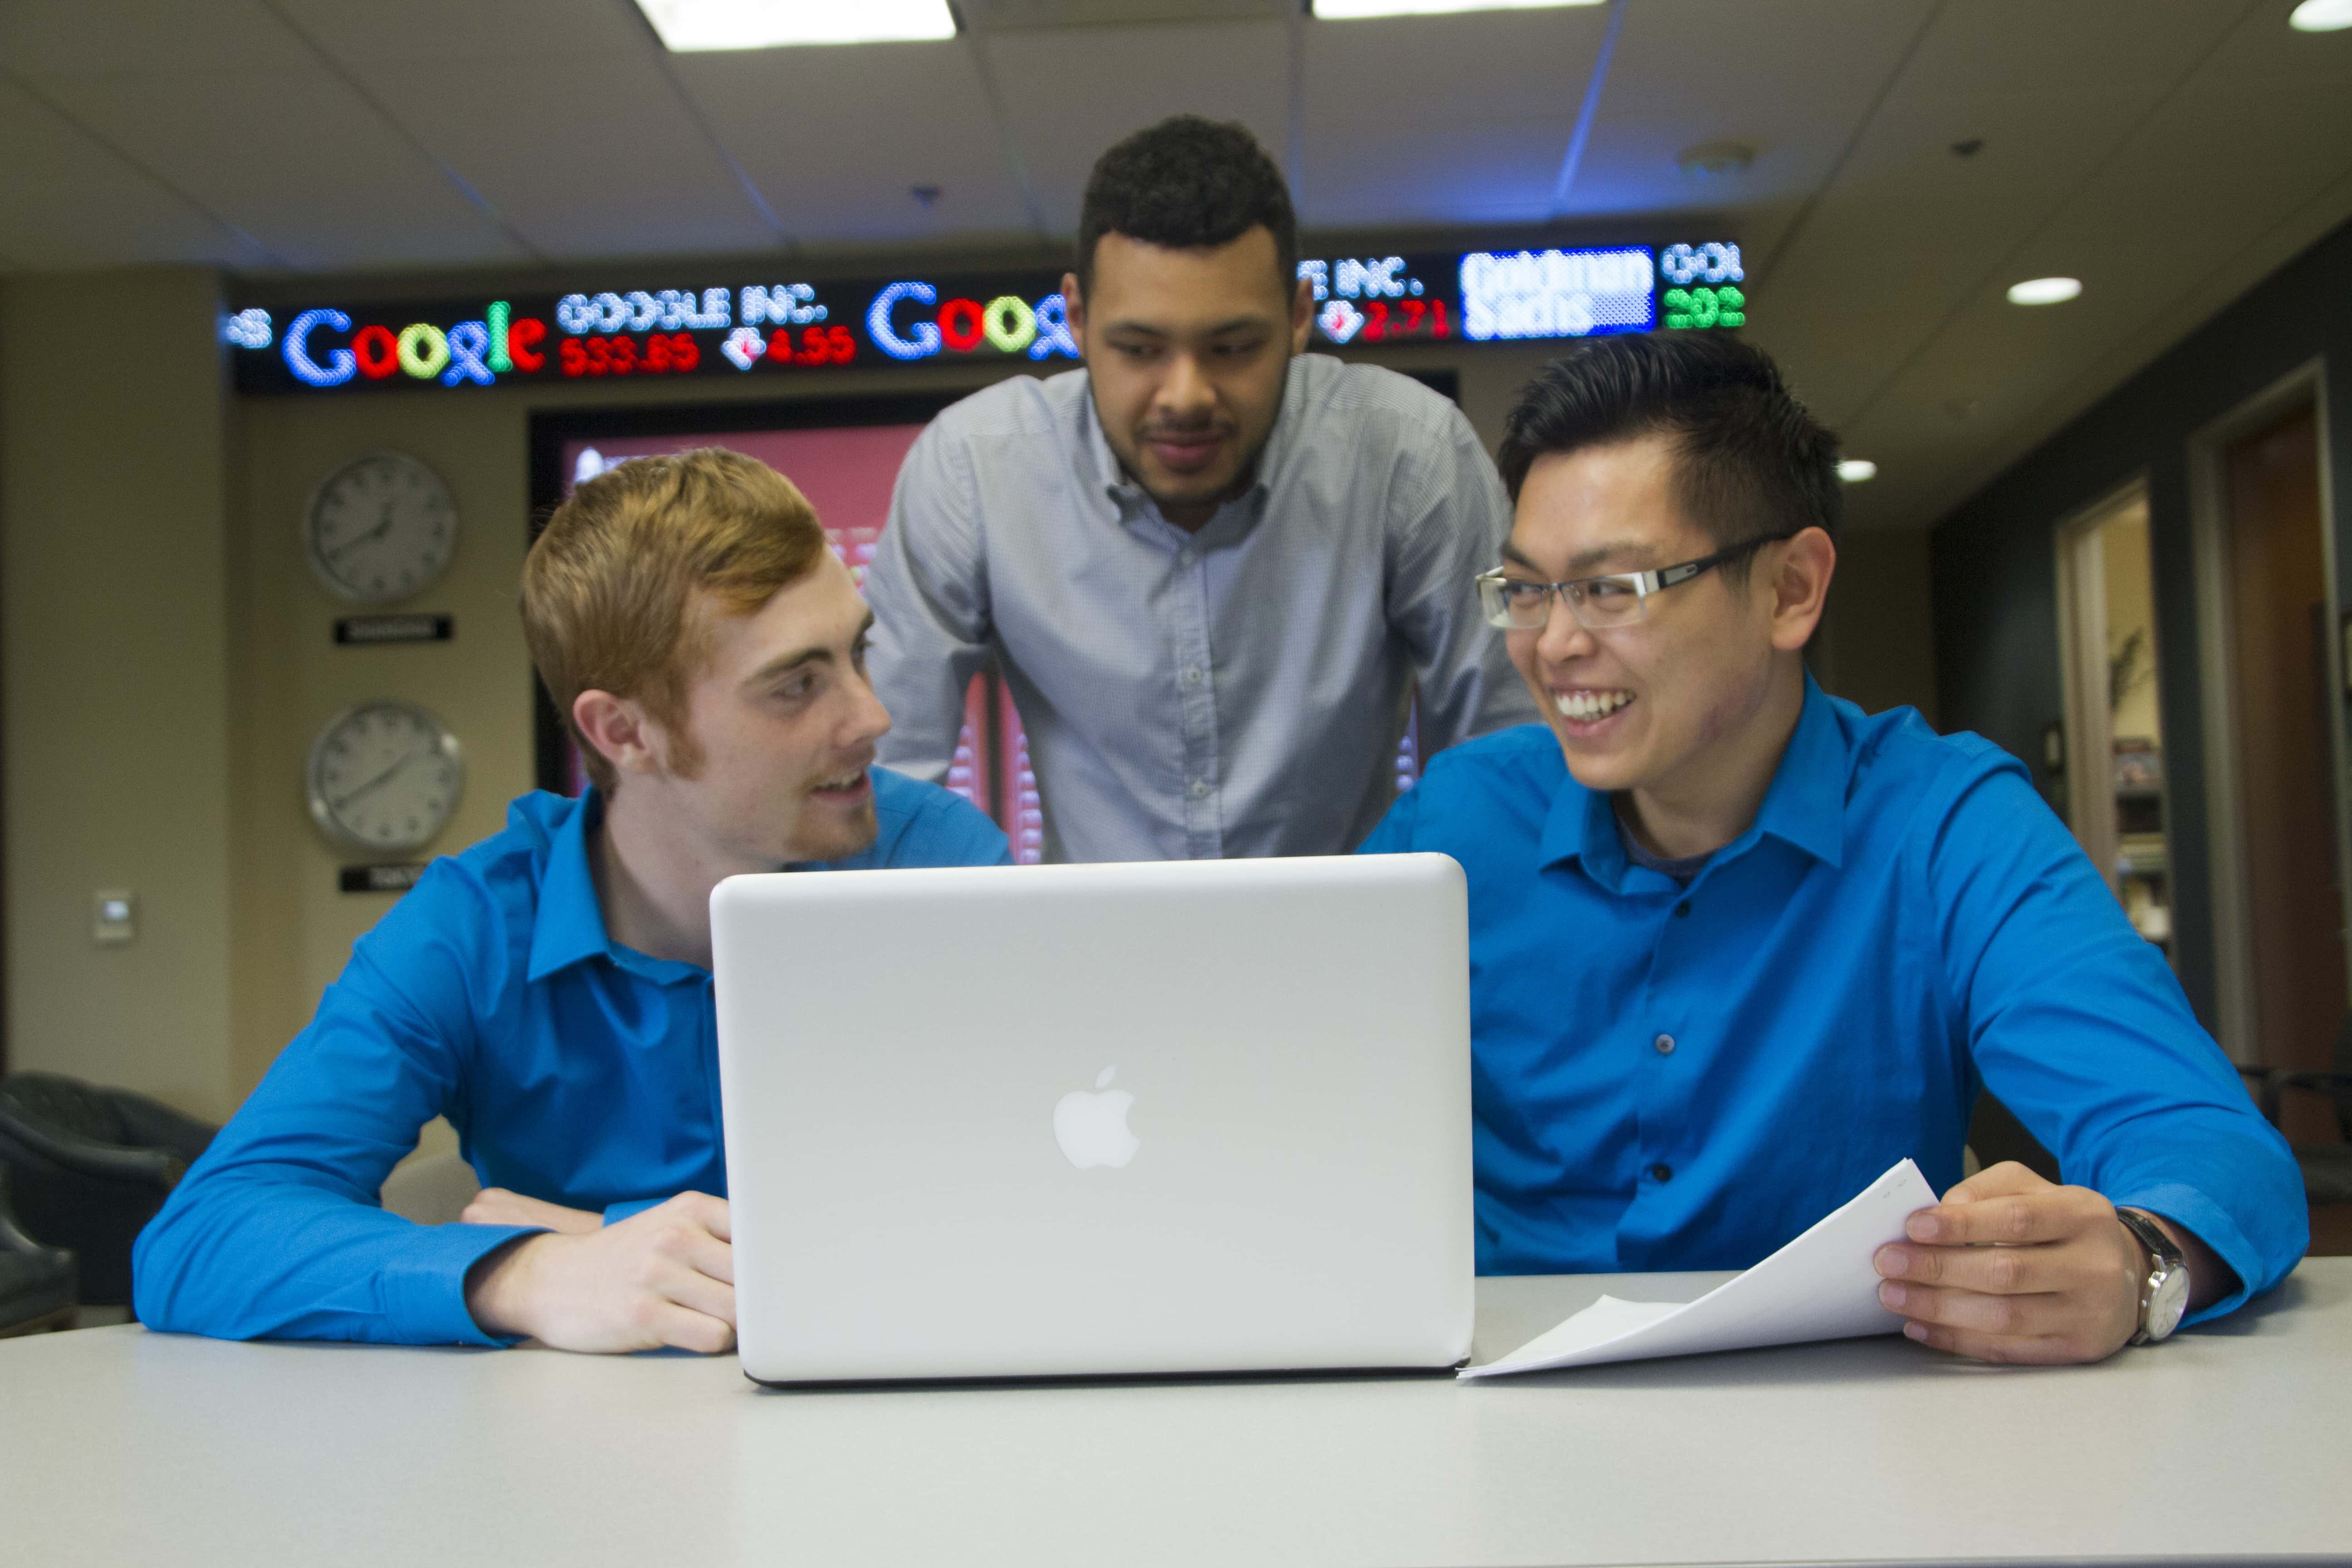 The students on winning Team C, from left: Tony Seery, Harvey Contreras, and Nhat Nguyen. (Southwestern Adventist University)